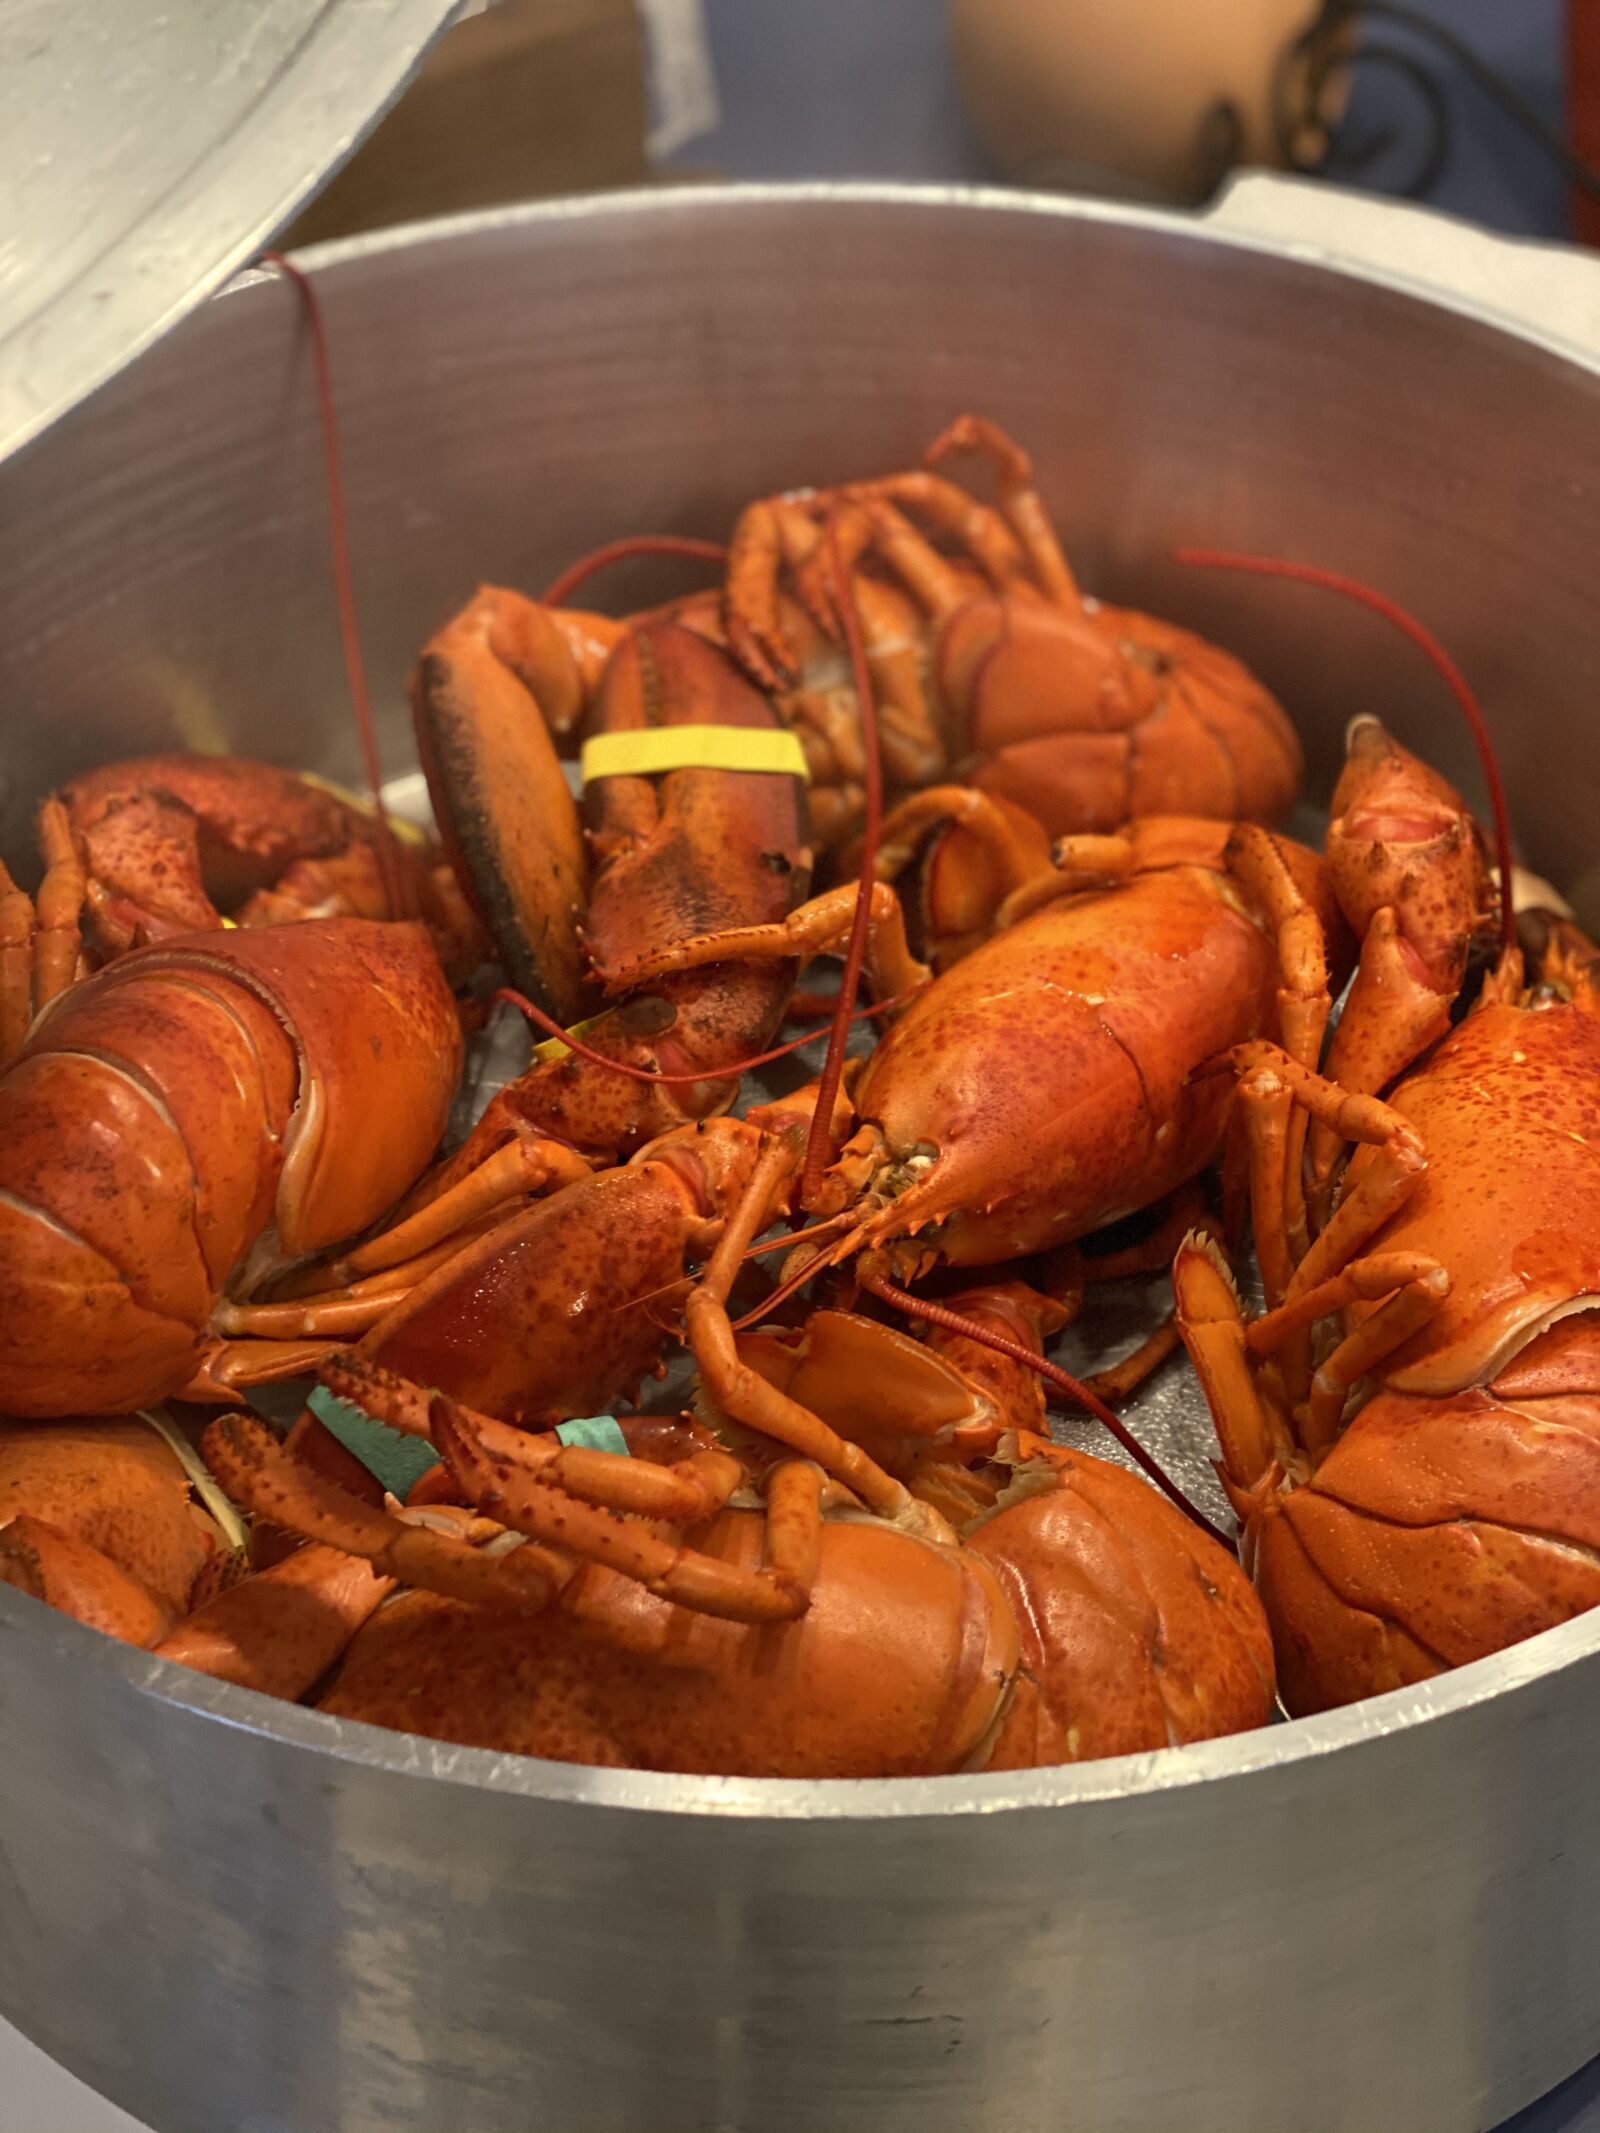 Apple iPhone 11 Pro Max + iPhone 11 Pro Max back dual camera 6mm f/2 sample photo. Lobster, pot, cooking photography